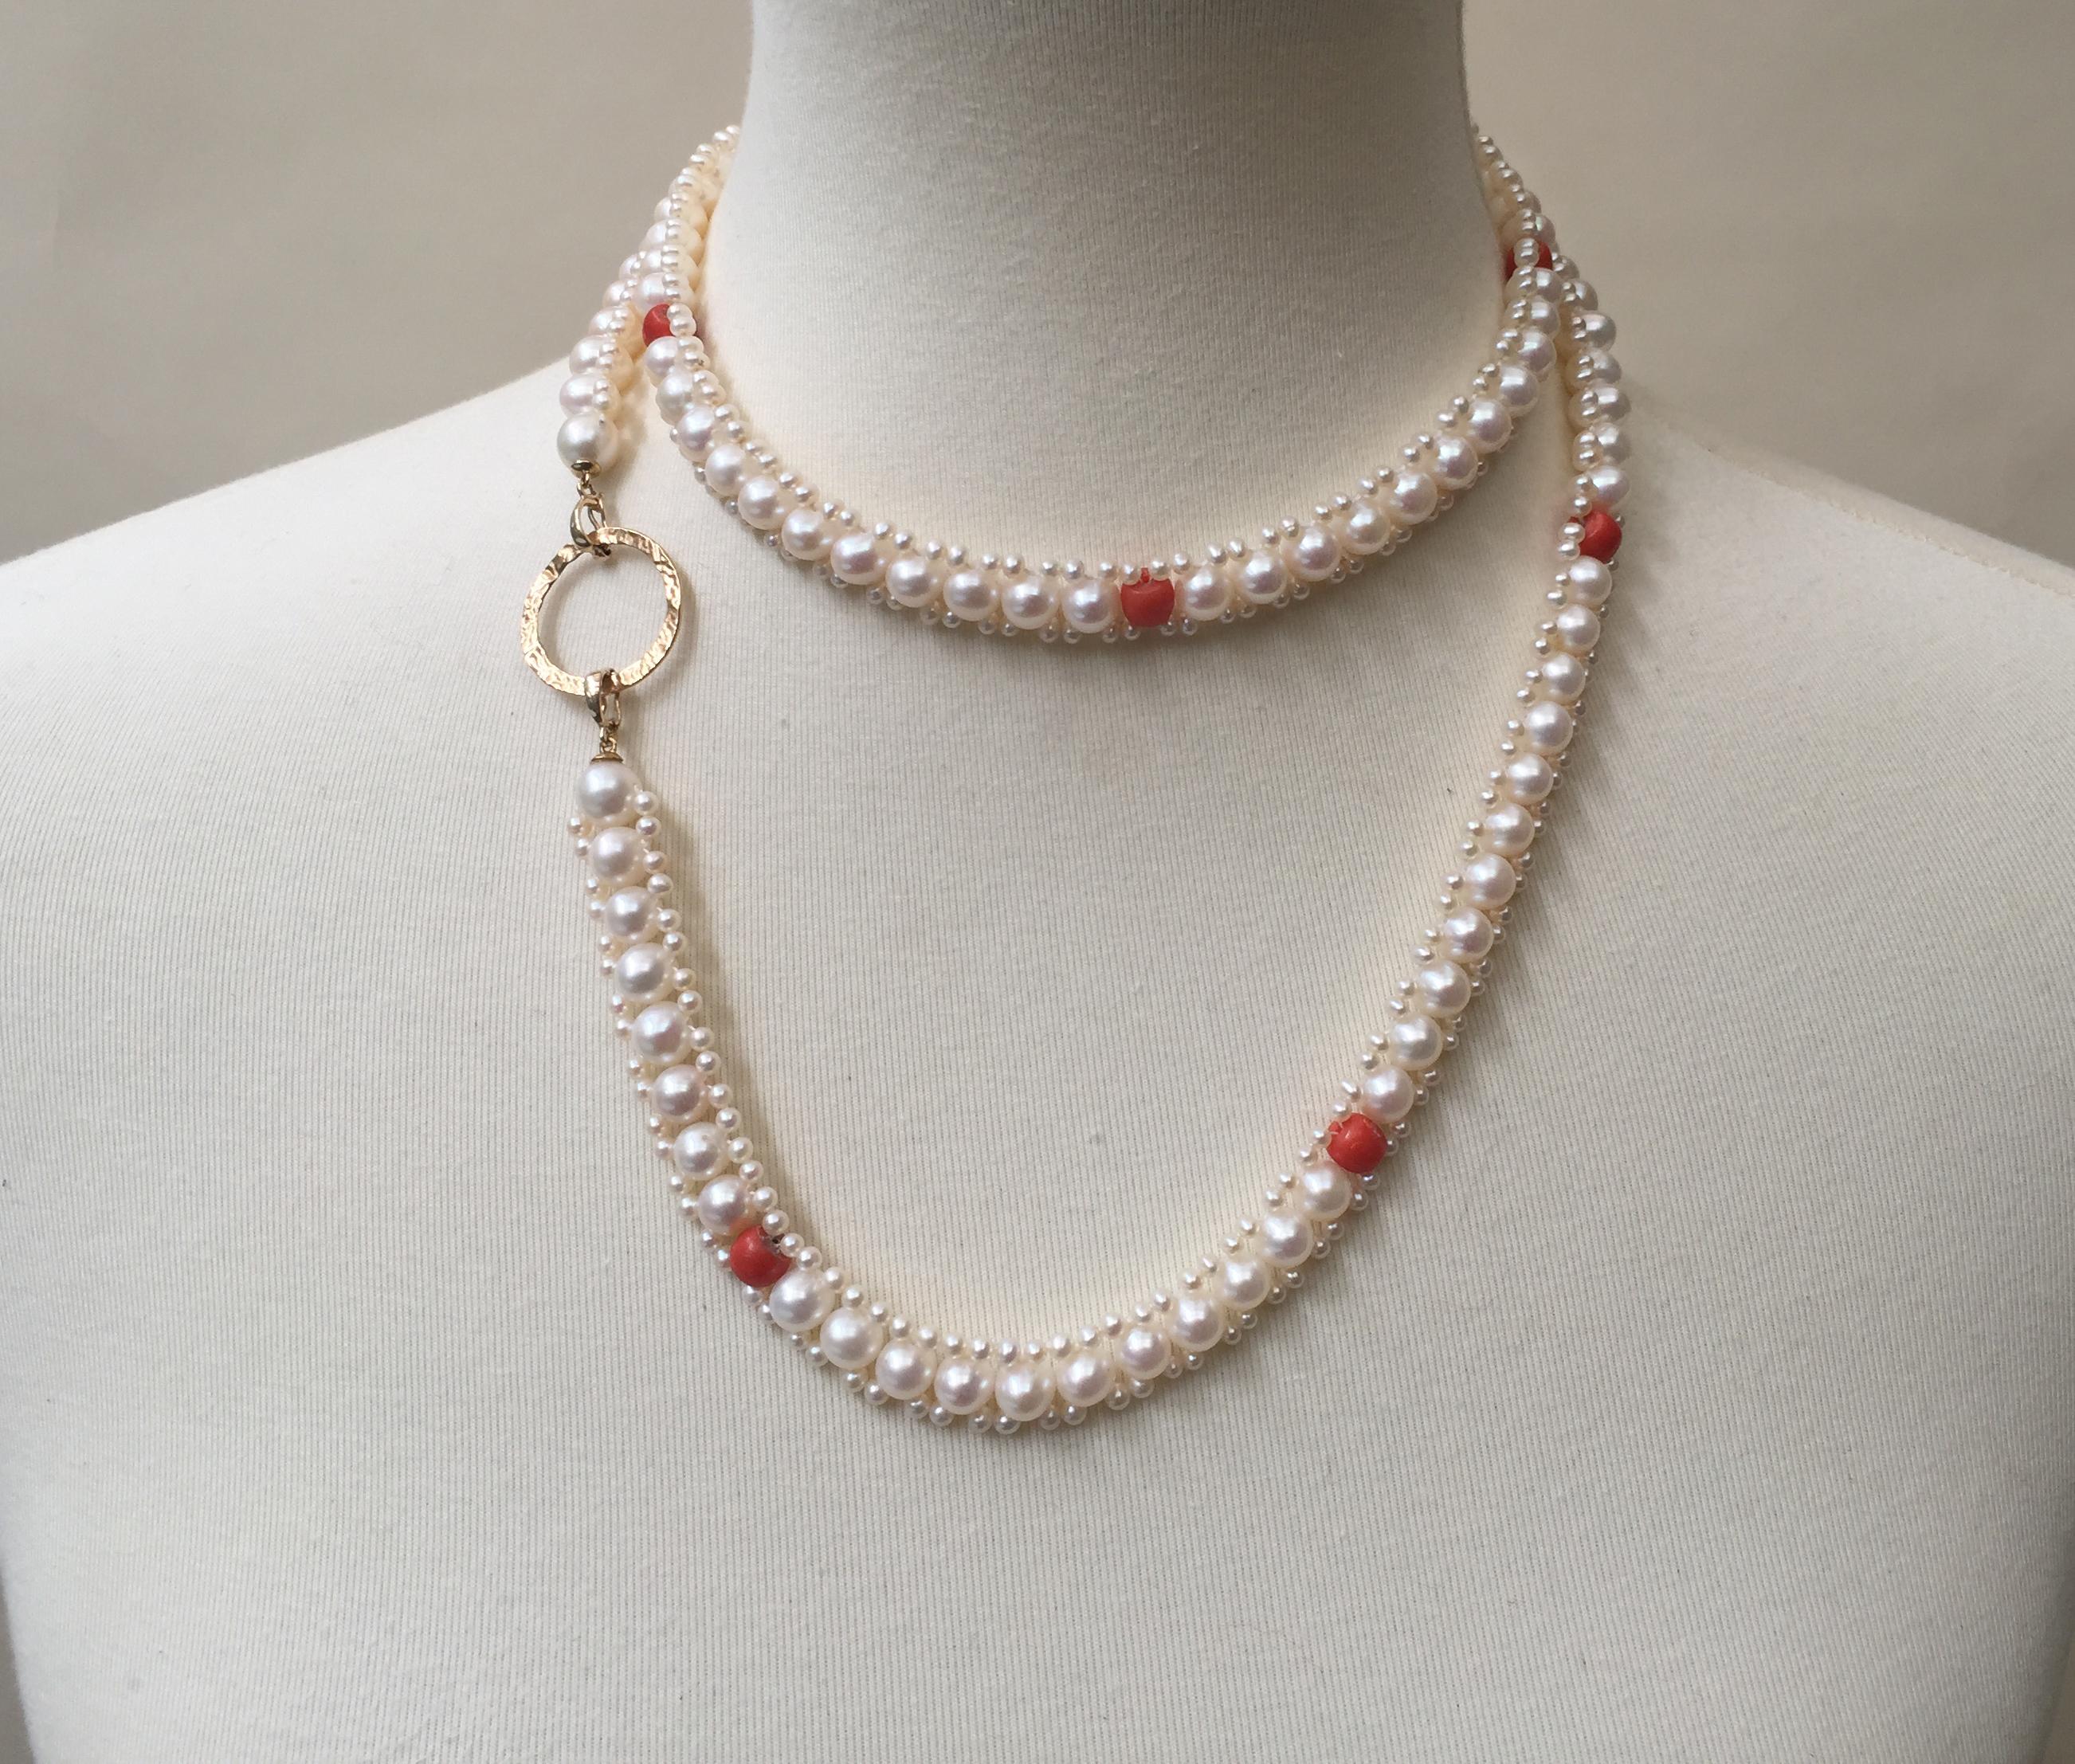 Woven White Pearl and Coral Necklace with Large Baroque Pearl, Gold and Diamonds 1